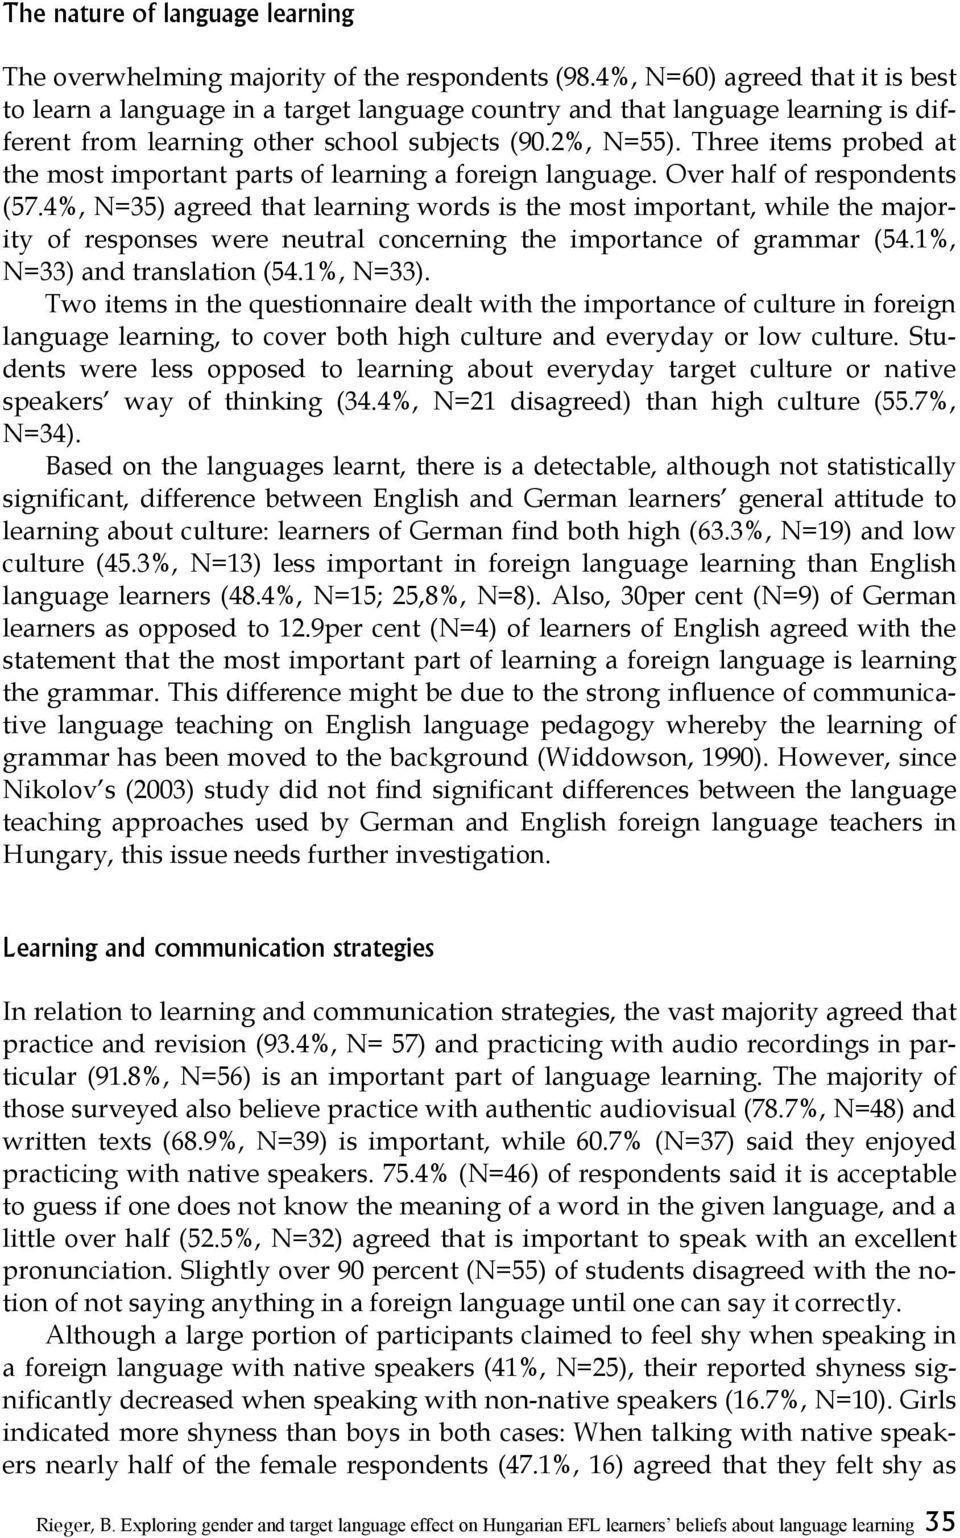 Three items probed at the most important parts of learning a foreign language. Over half of respondents (57.